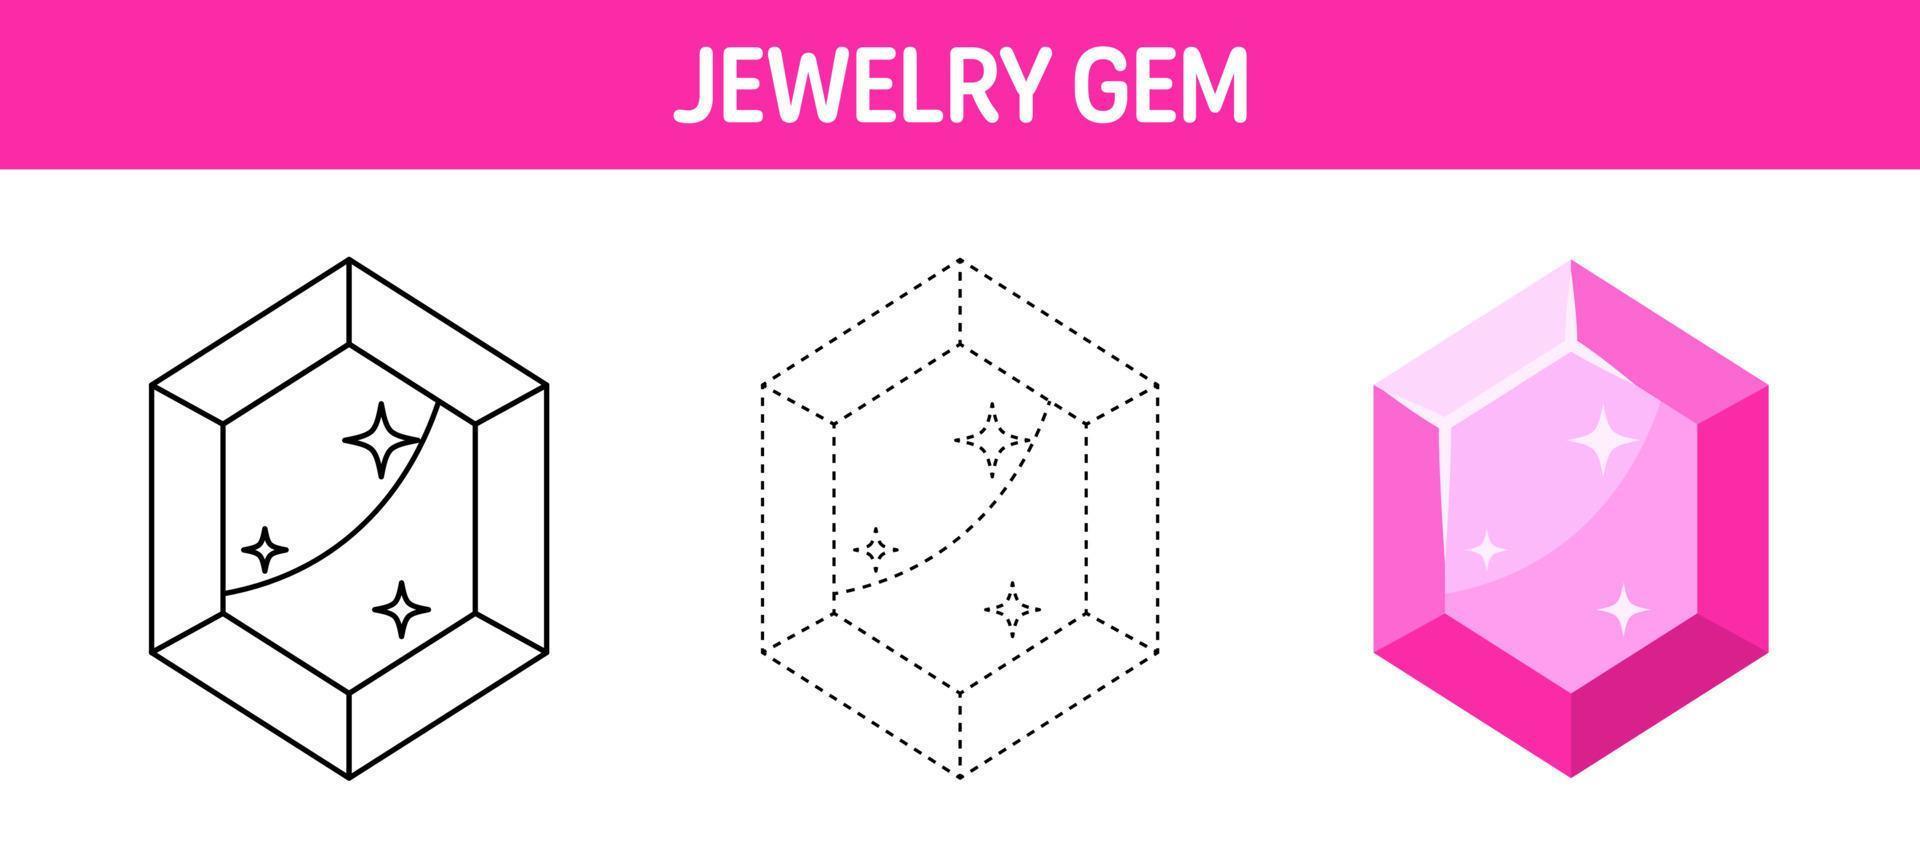 Gem tracing and coloring worksheet for kids vector